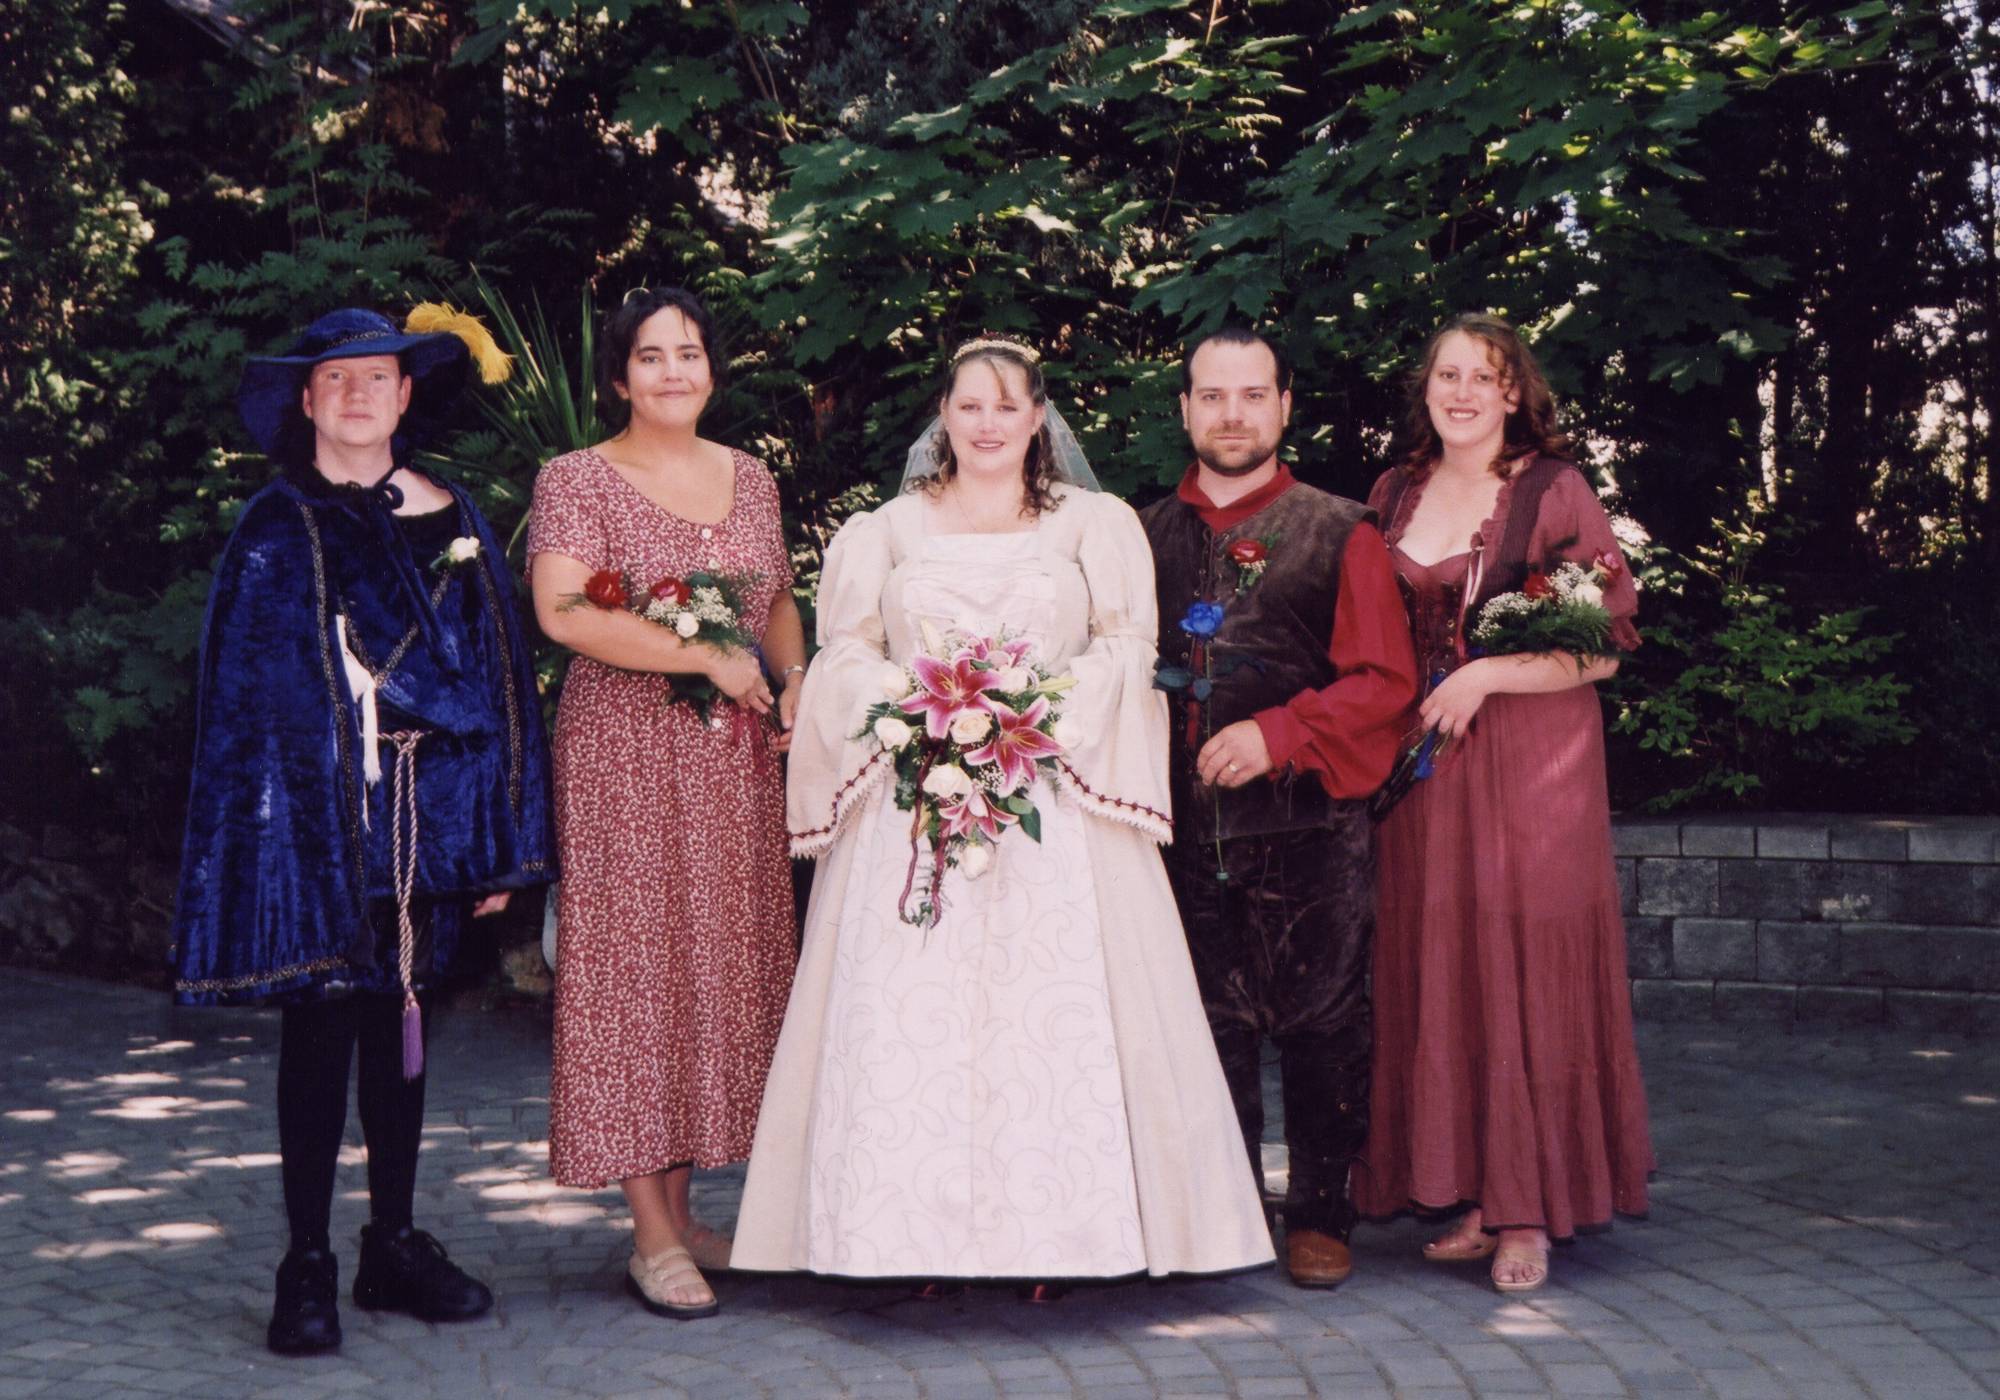 Wedding of Stéphane Charette and Kathie Newell